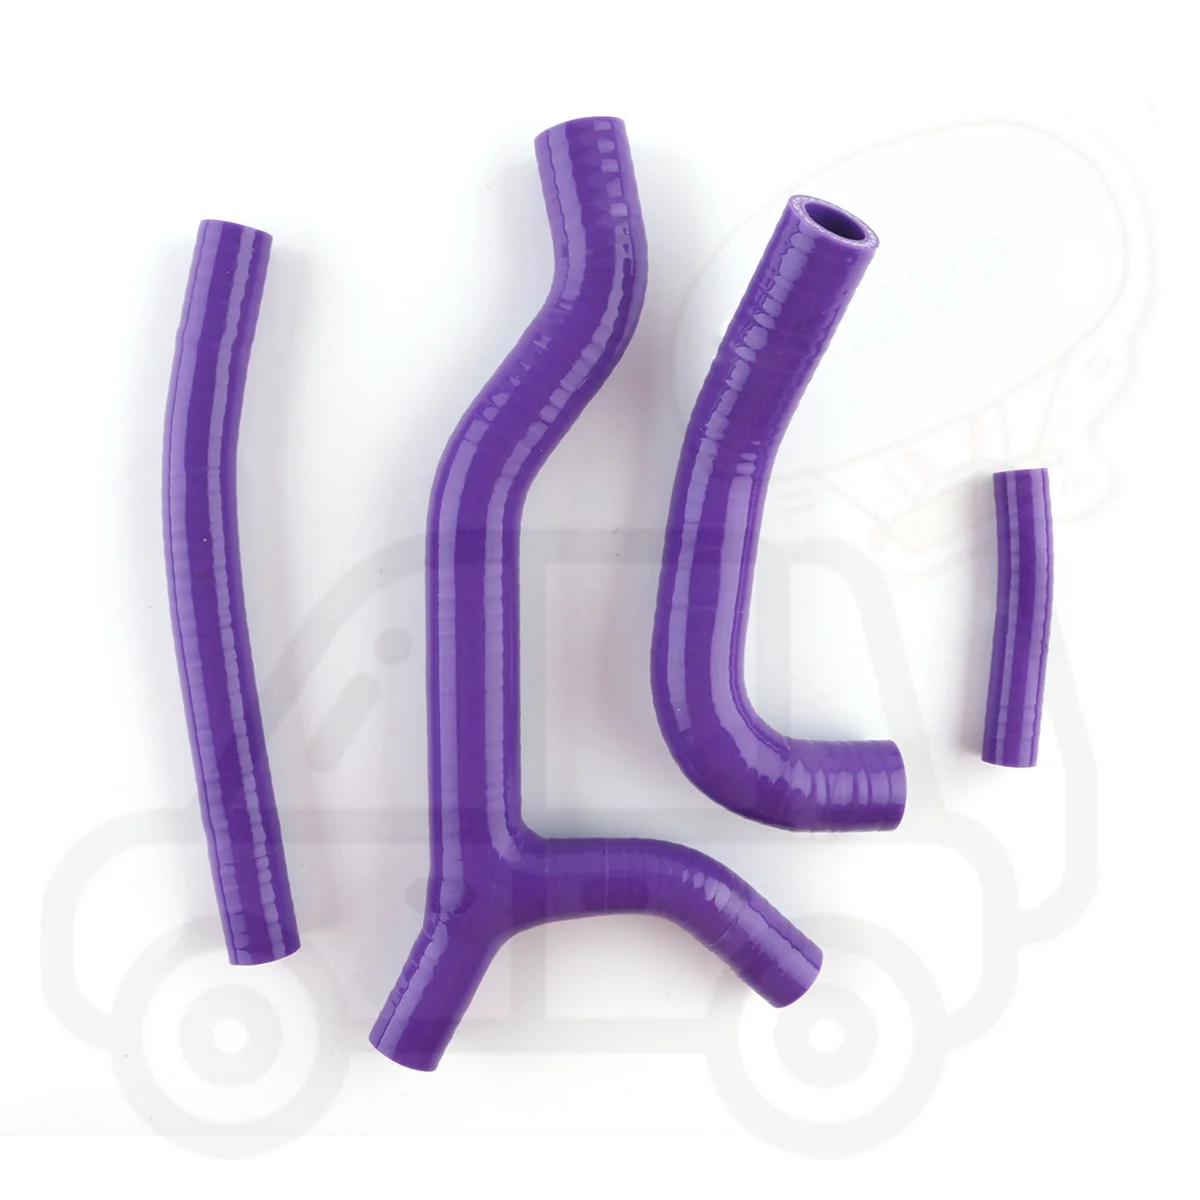 

4PCS Silicone Radiator Coolant Hose For 1992-1995 Suzuki RM125 RM 125 Replacement Parts 1993 1994 Upper and Lower